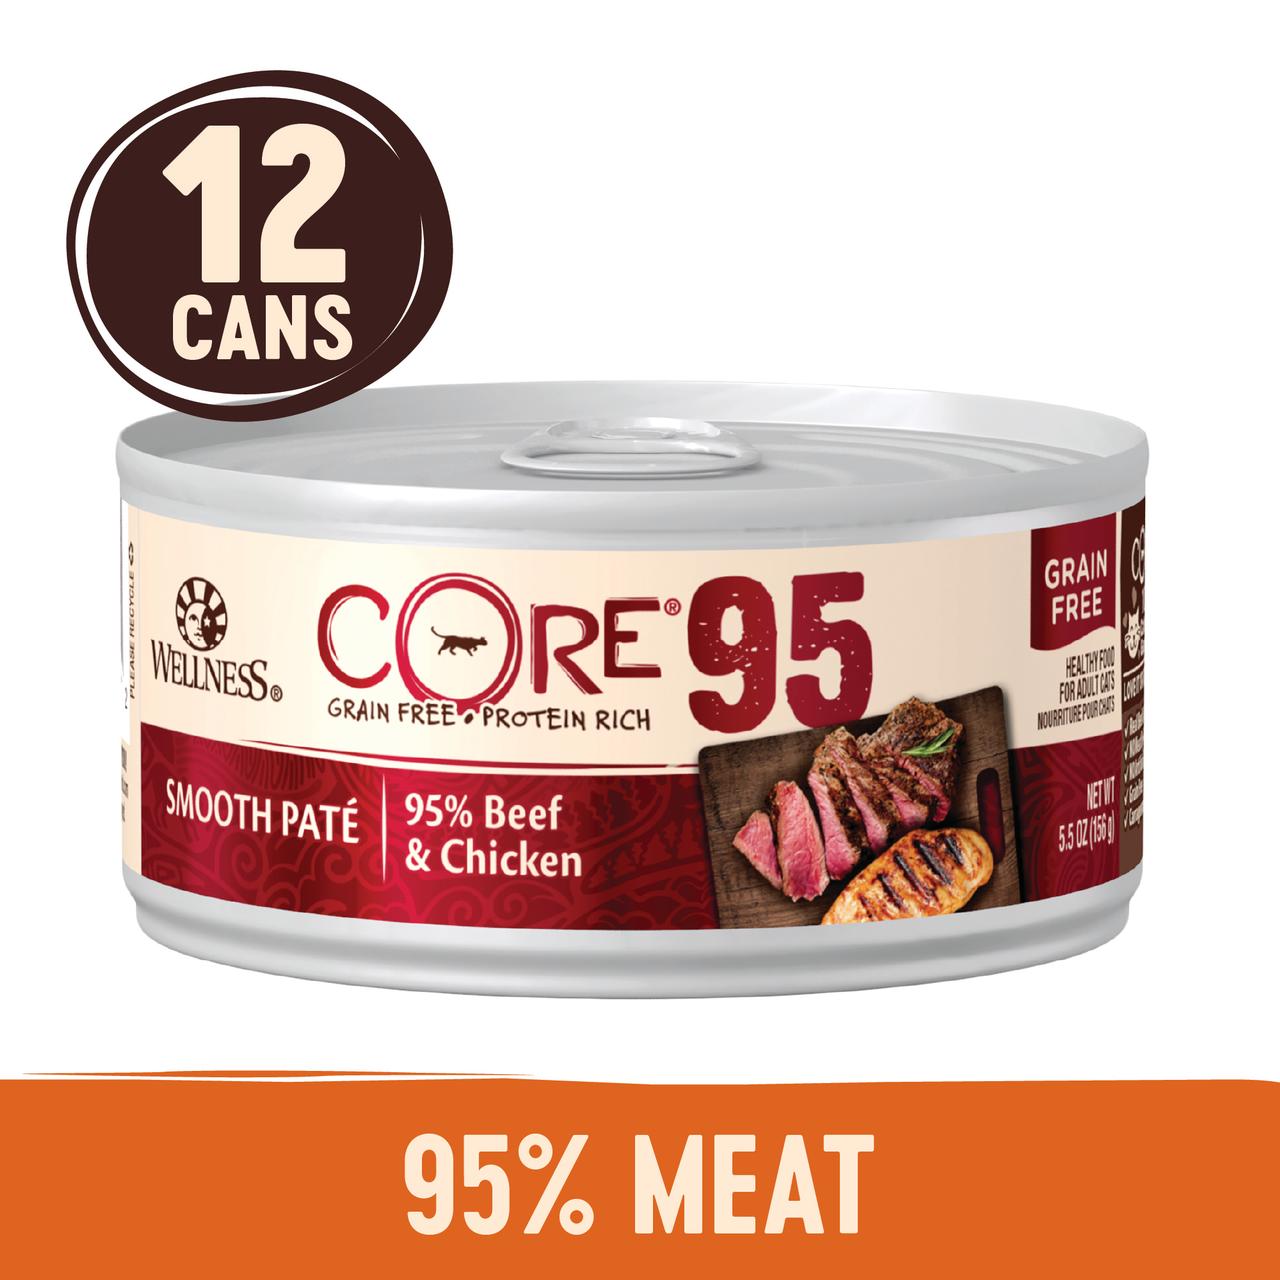 Wellness CORE 95% Natural Grain Free Wet Canned Cat Food, Beef & Chicken, 5.5-Ounce Can (Pack of 12) - image 1 of 8